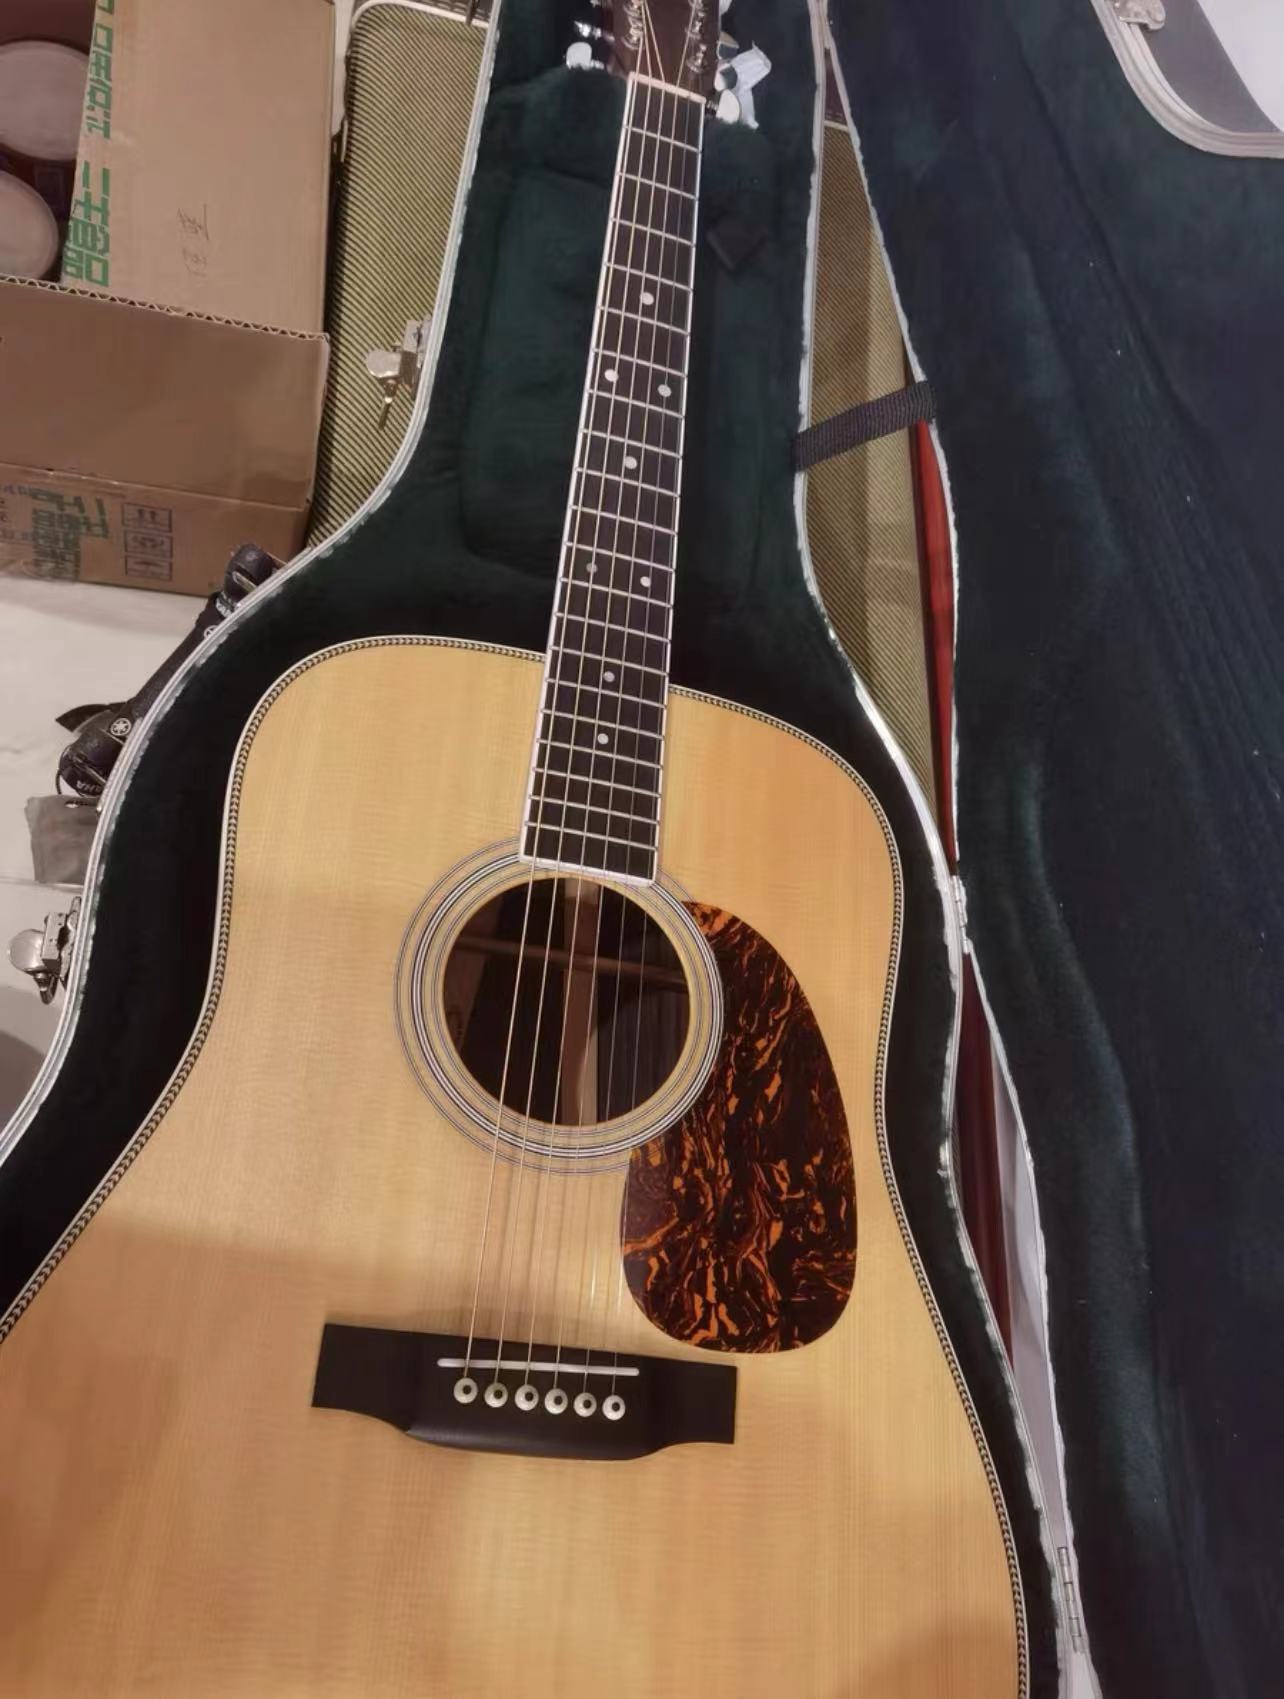 The Martin Dreadnought Junior: A Compact Acoustic Guitar with a Big Sound